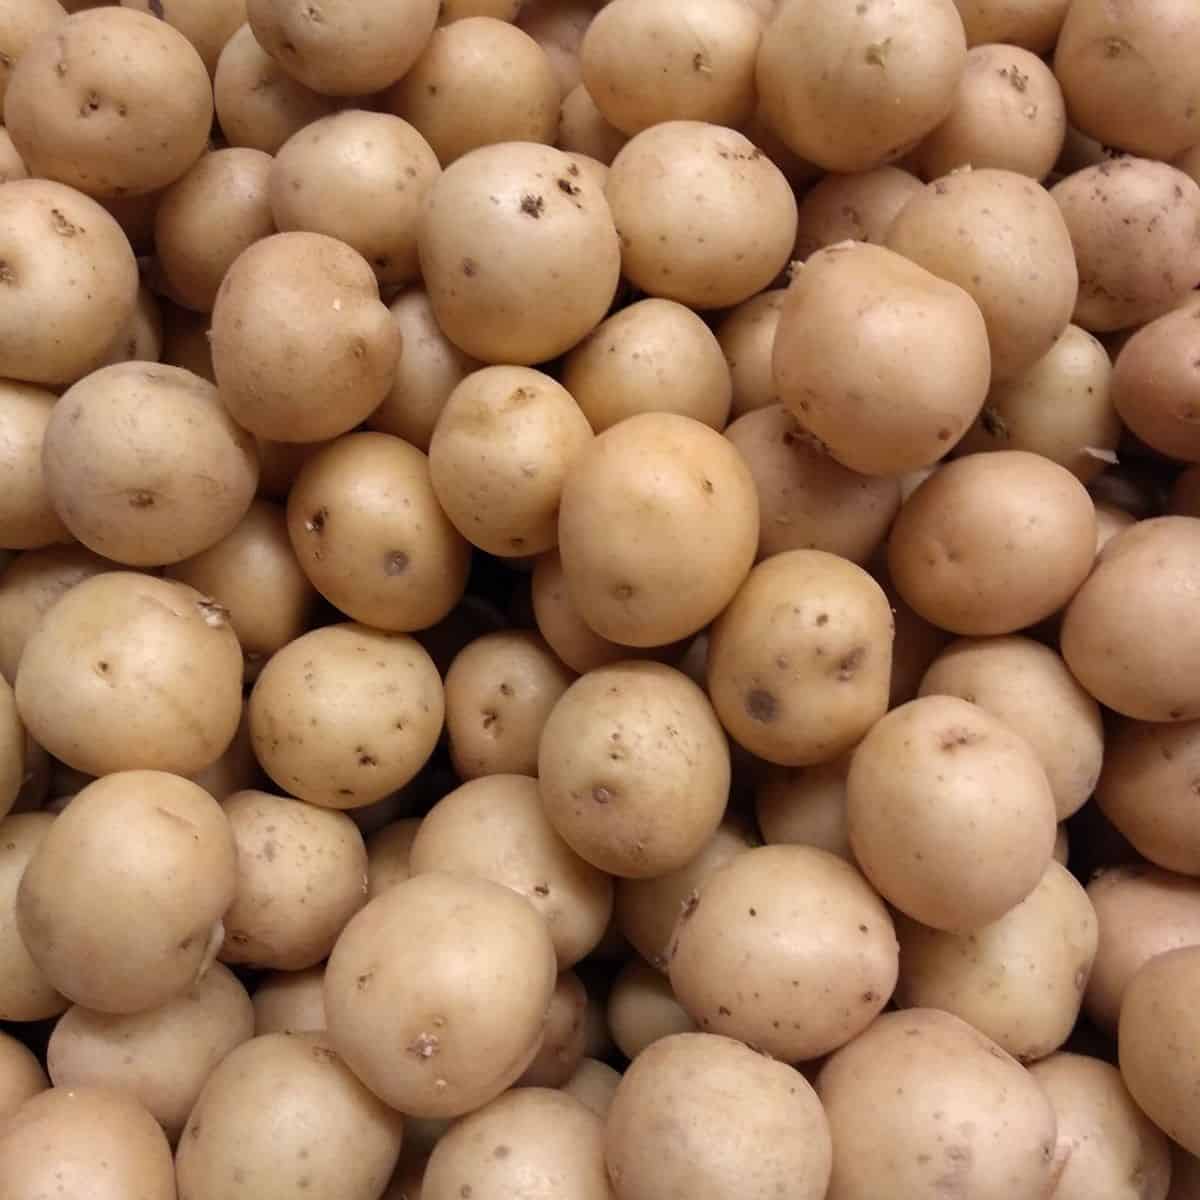 A close up of small light brown colored potatoes.